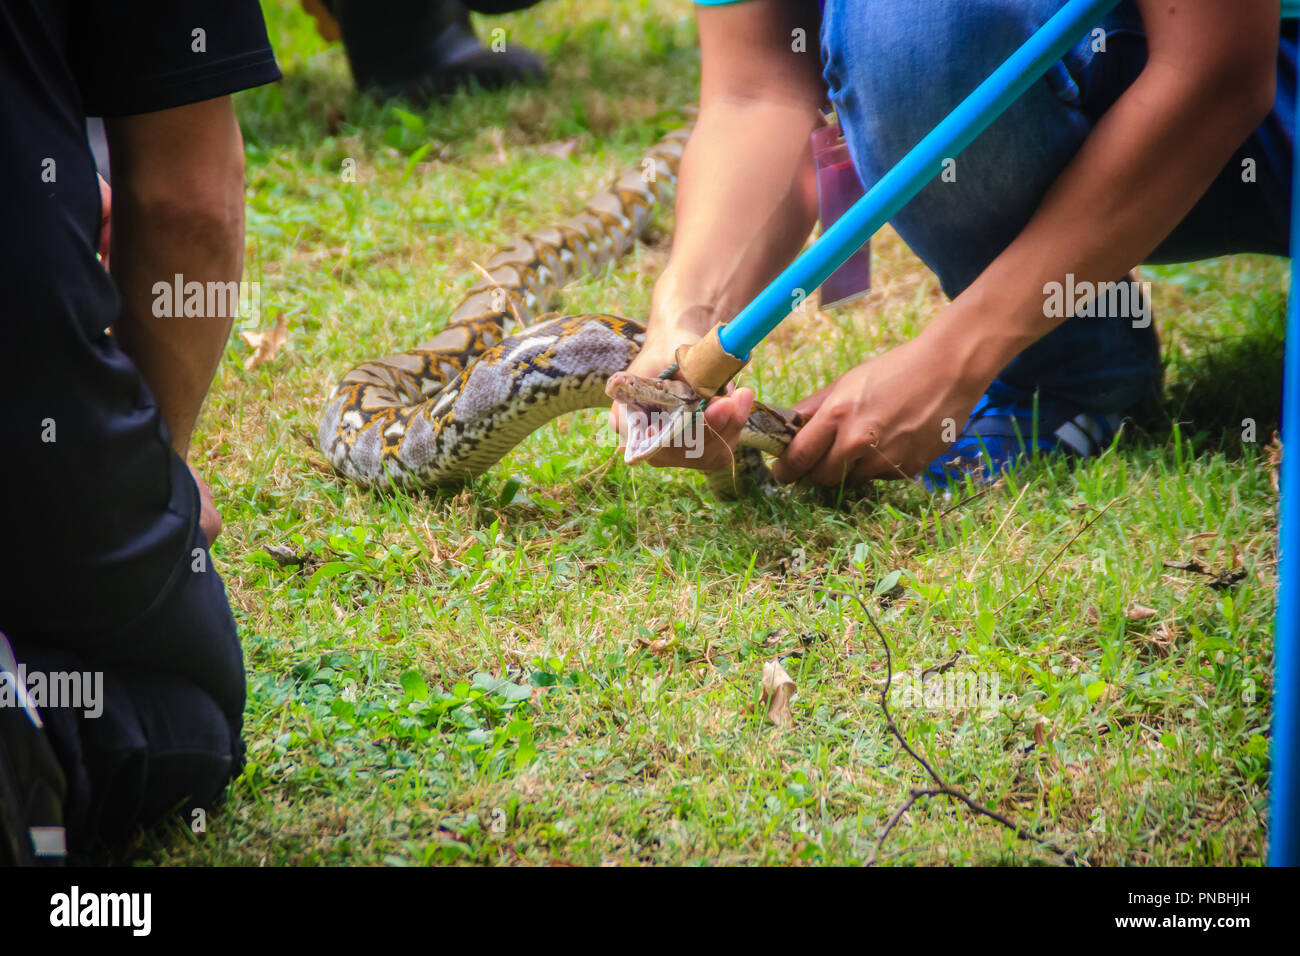 https://c8.alamy.com/comp/PNBHJH/people-are-catching-snake-in-the-garden-with-snake-catcher-tool-that-made-easy-from-pvc-pipe-and-rope-PNBHJH.jpg